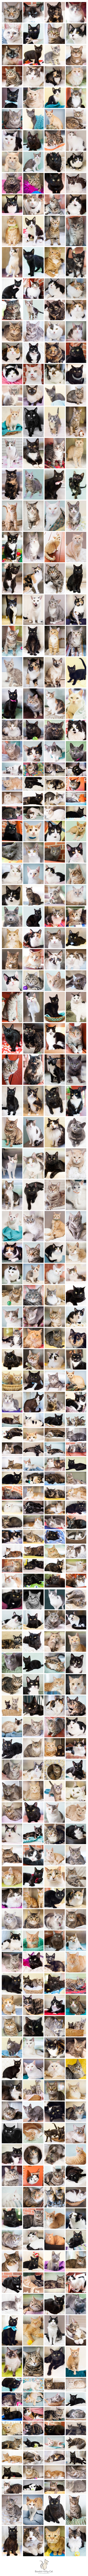 2014 Shelter Cats Photographed By Boudoir Kitty-Cat Photography